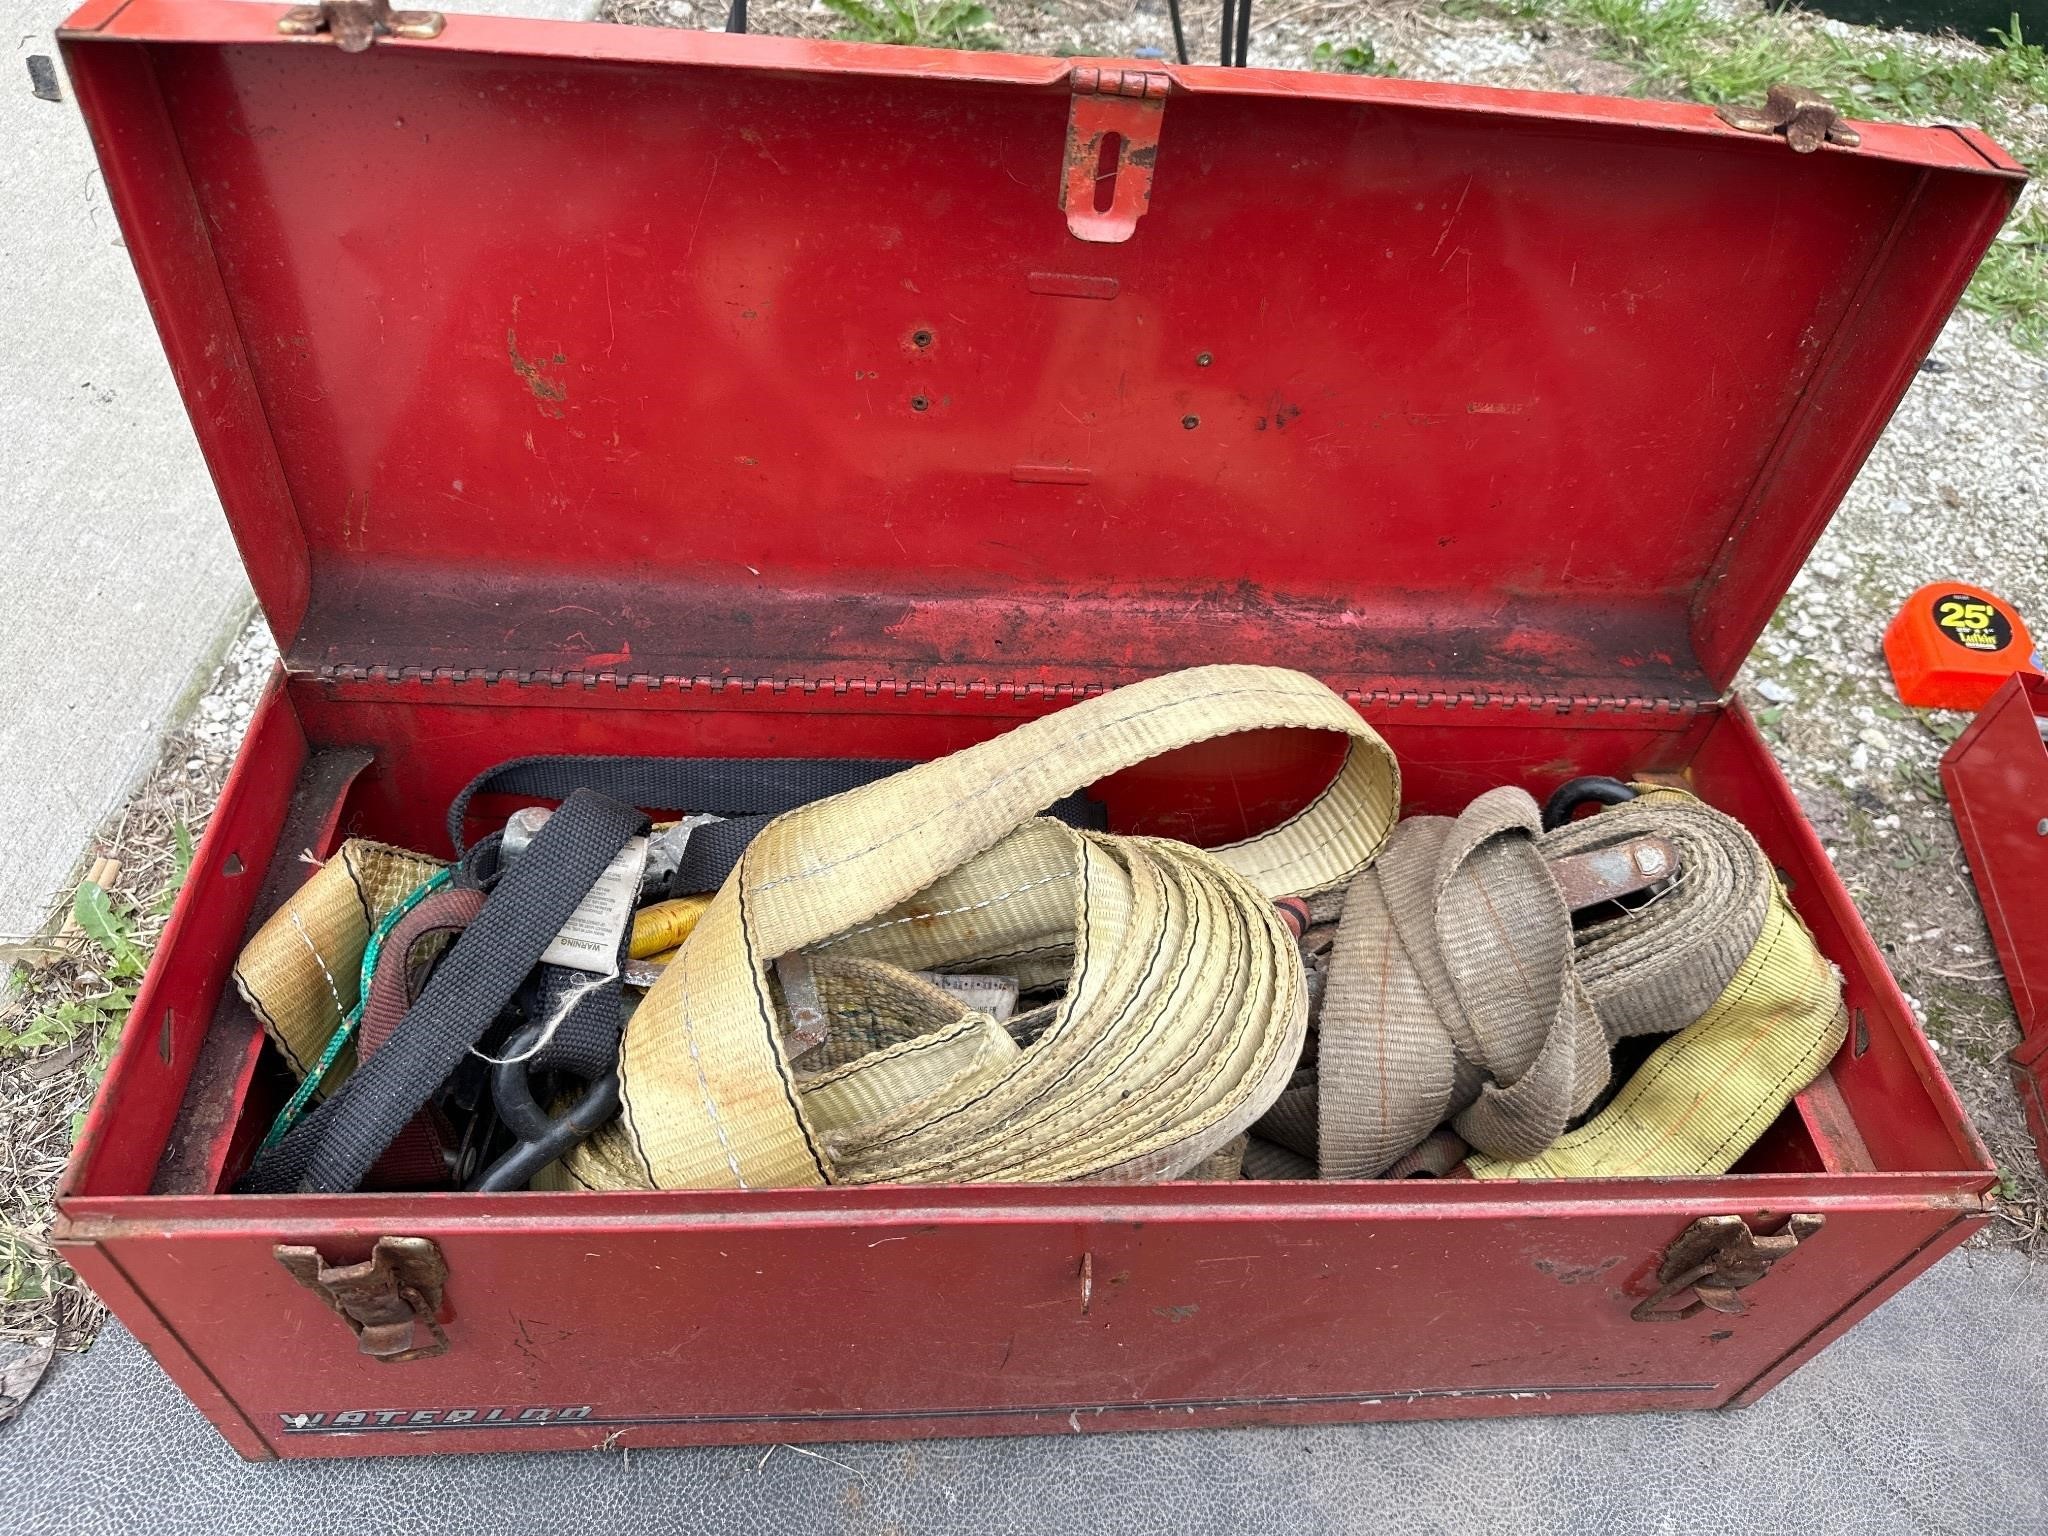 Waterloo toolbox and contents